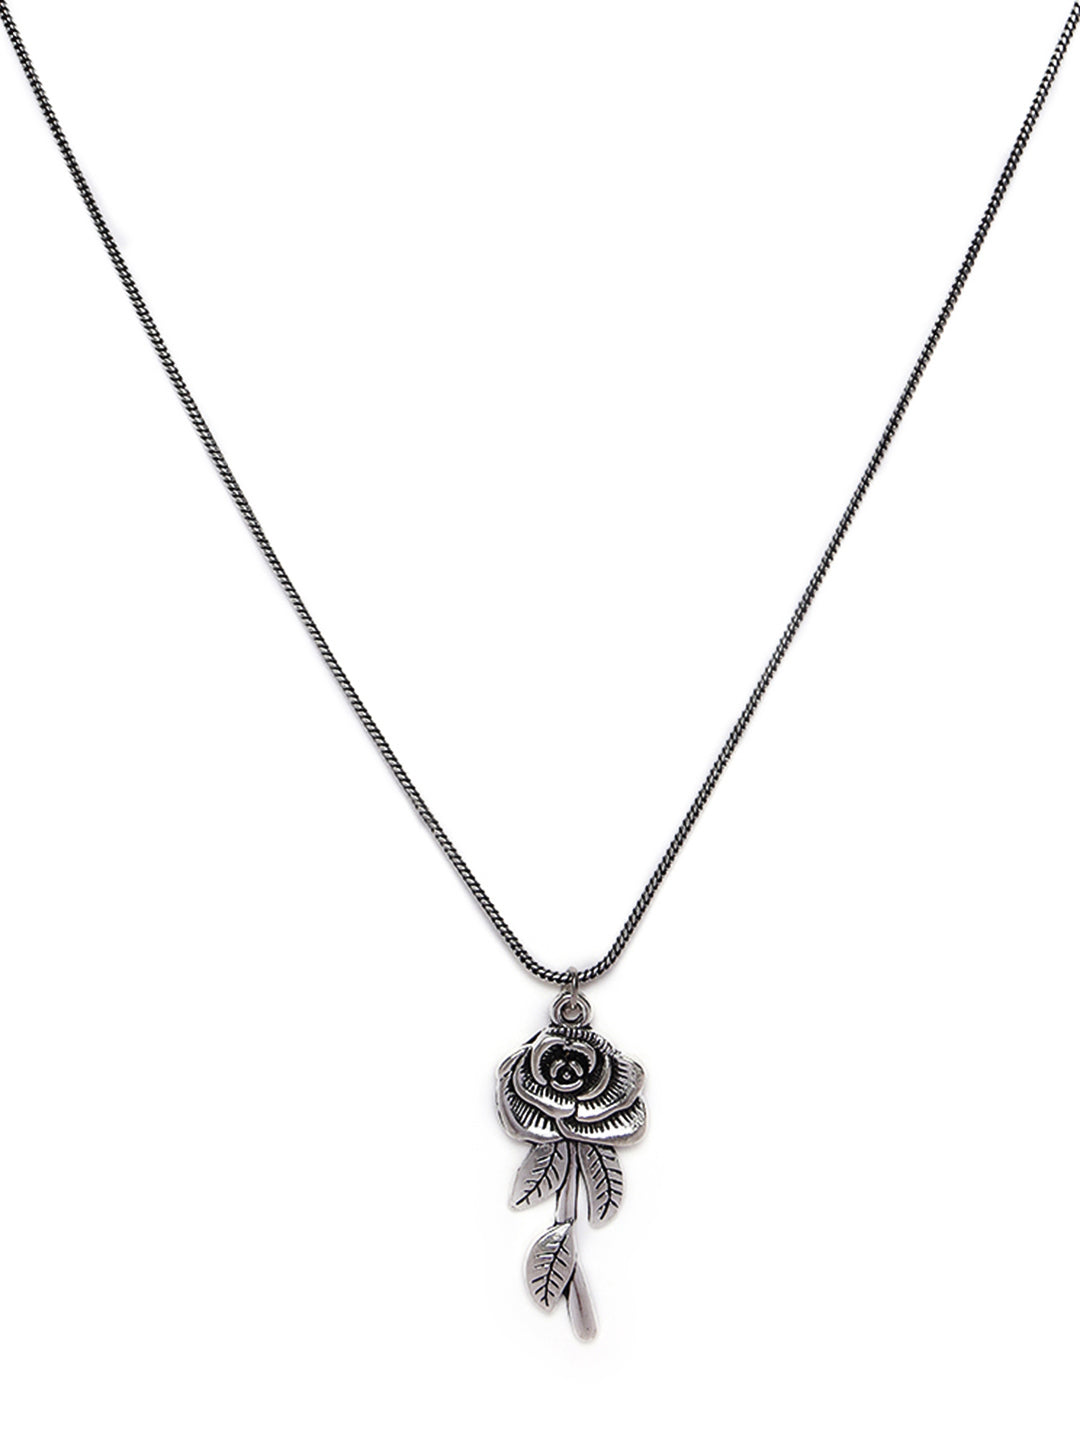 Set of 2 Heart & Rose shaped Oxidised Silver-Toned Textured Necklace